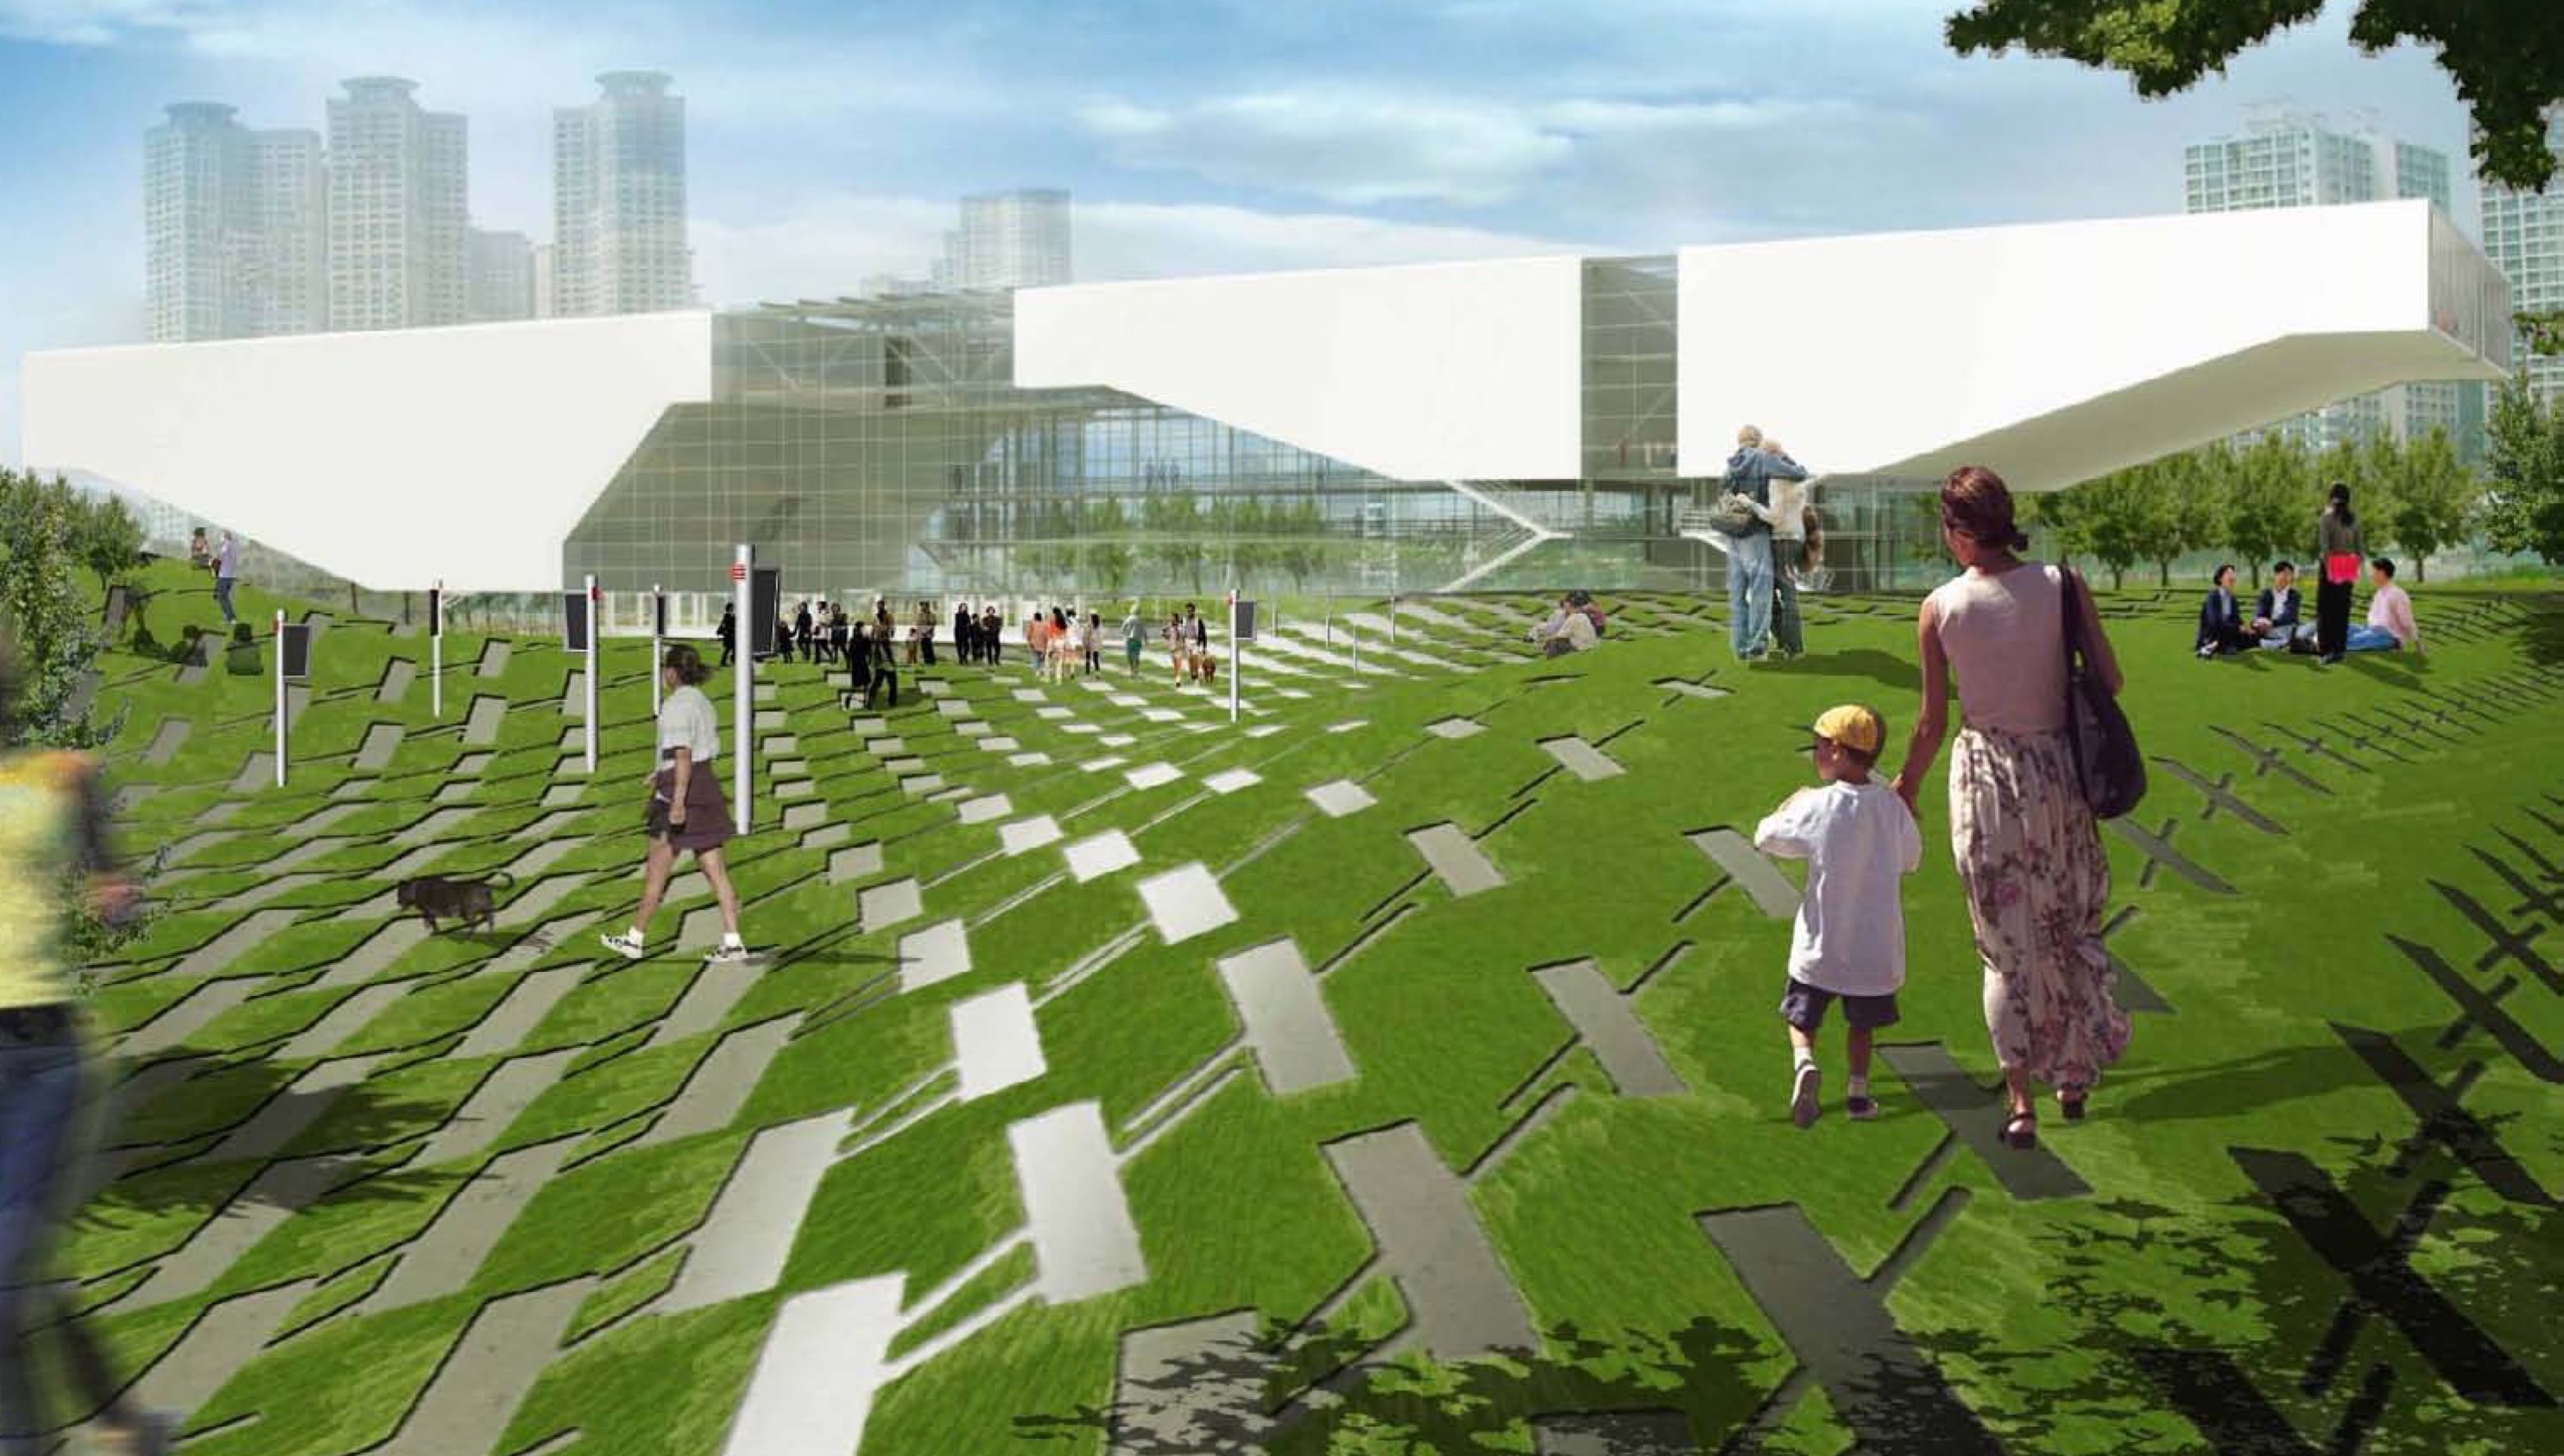 Perspective of the Busan Cinema competition entry.